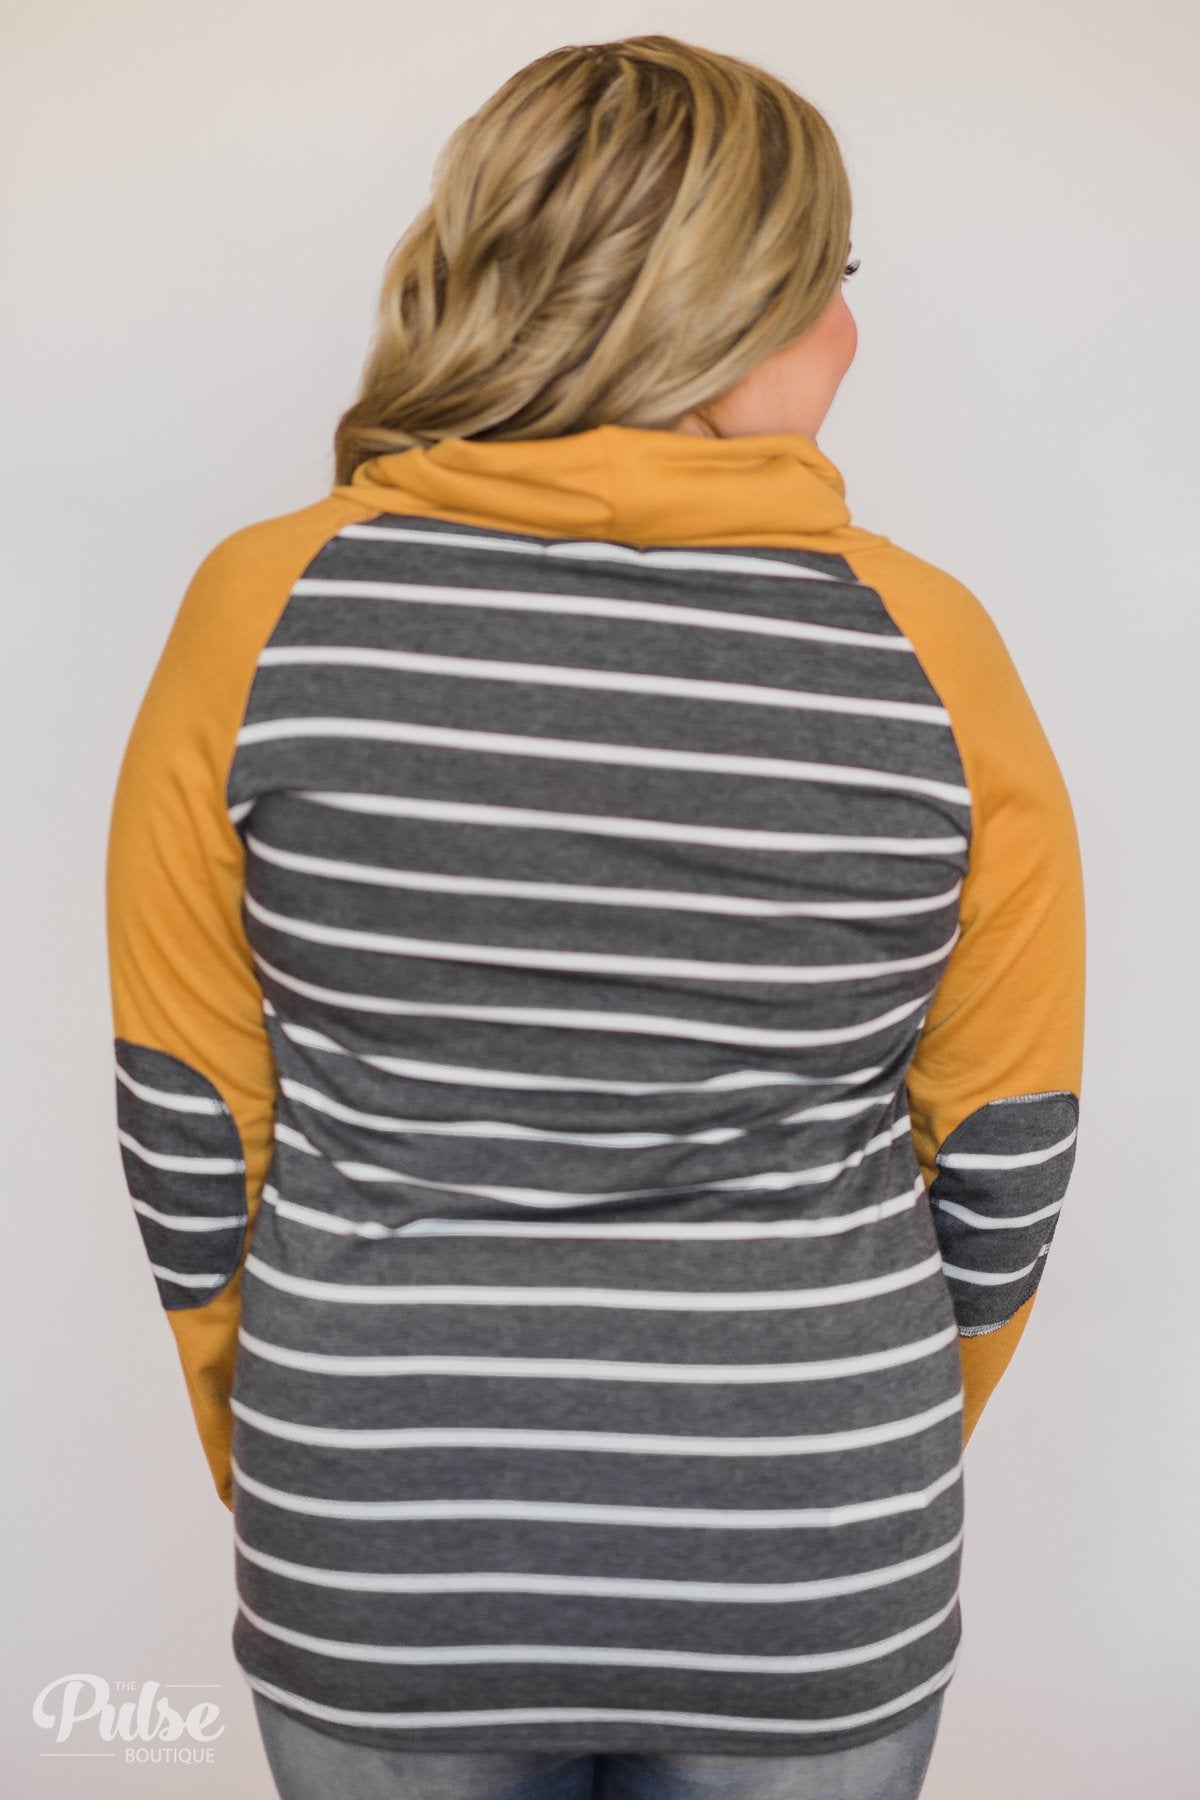 Perfect Match Striped Elbow Patch Cowl Neck- Mustard